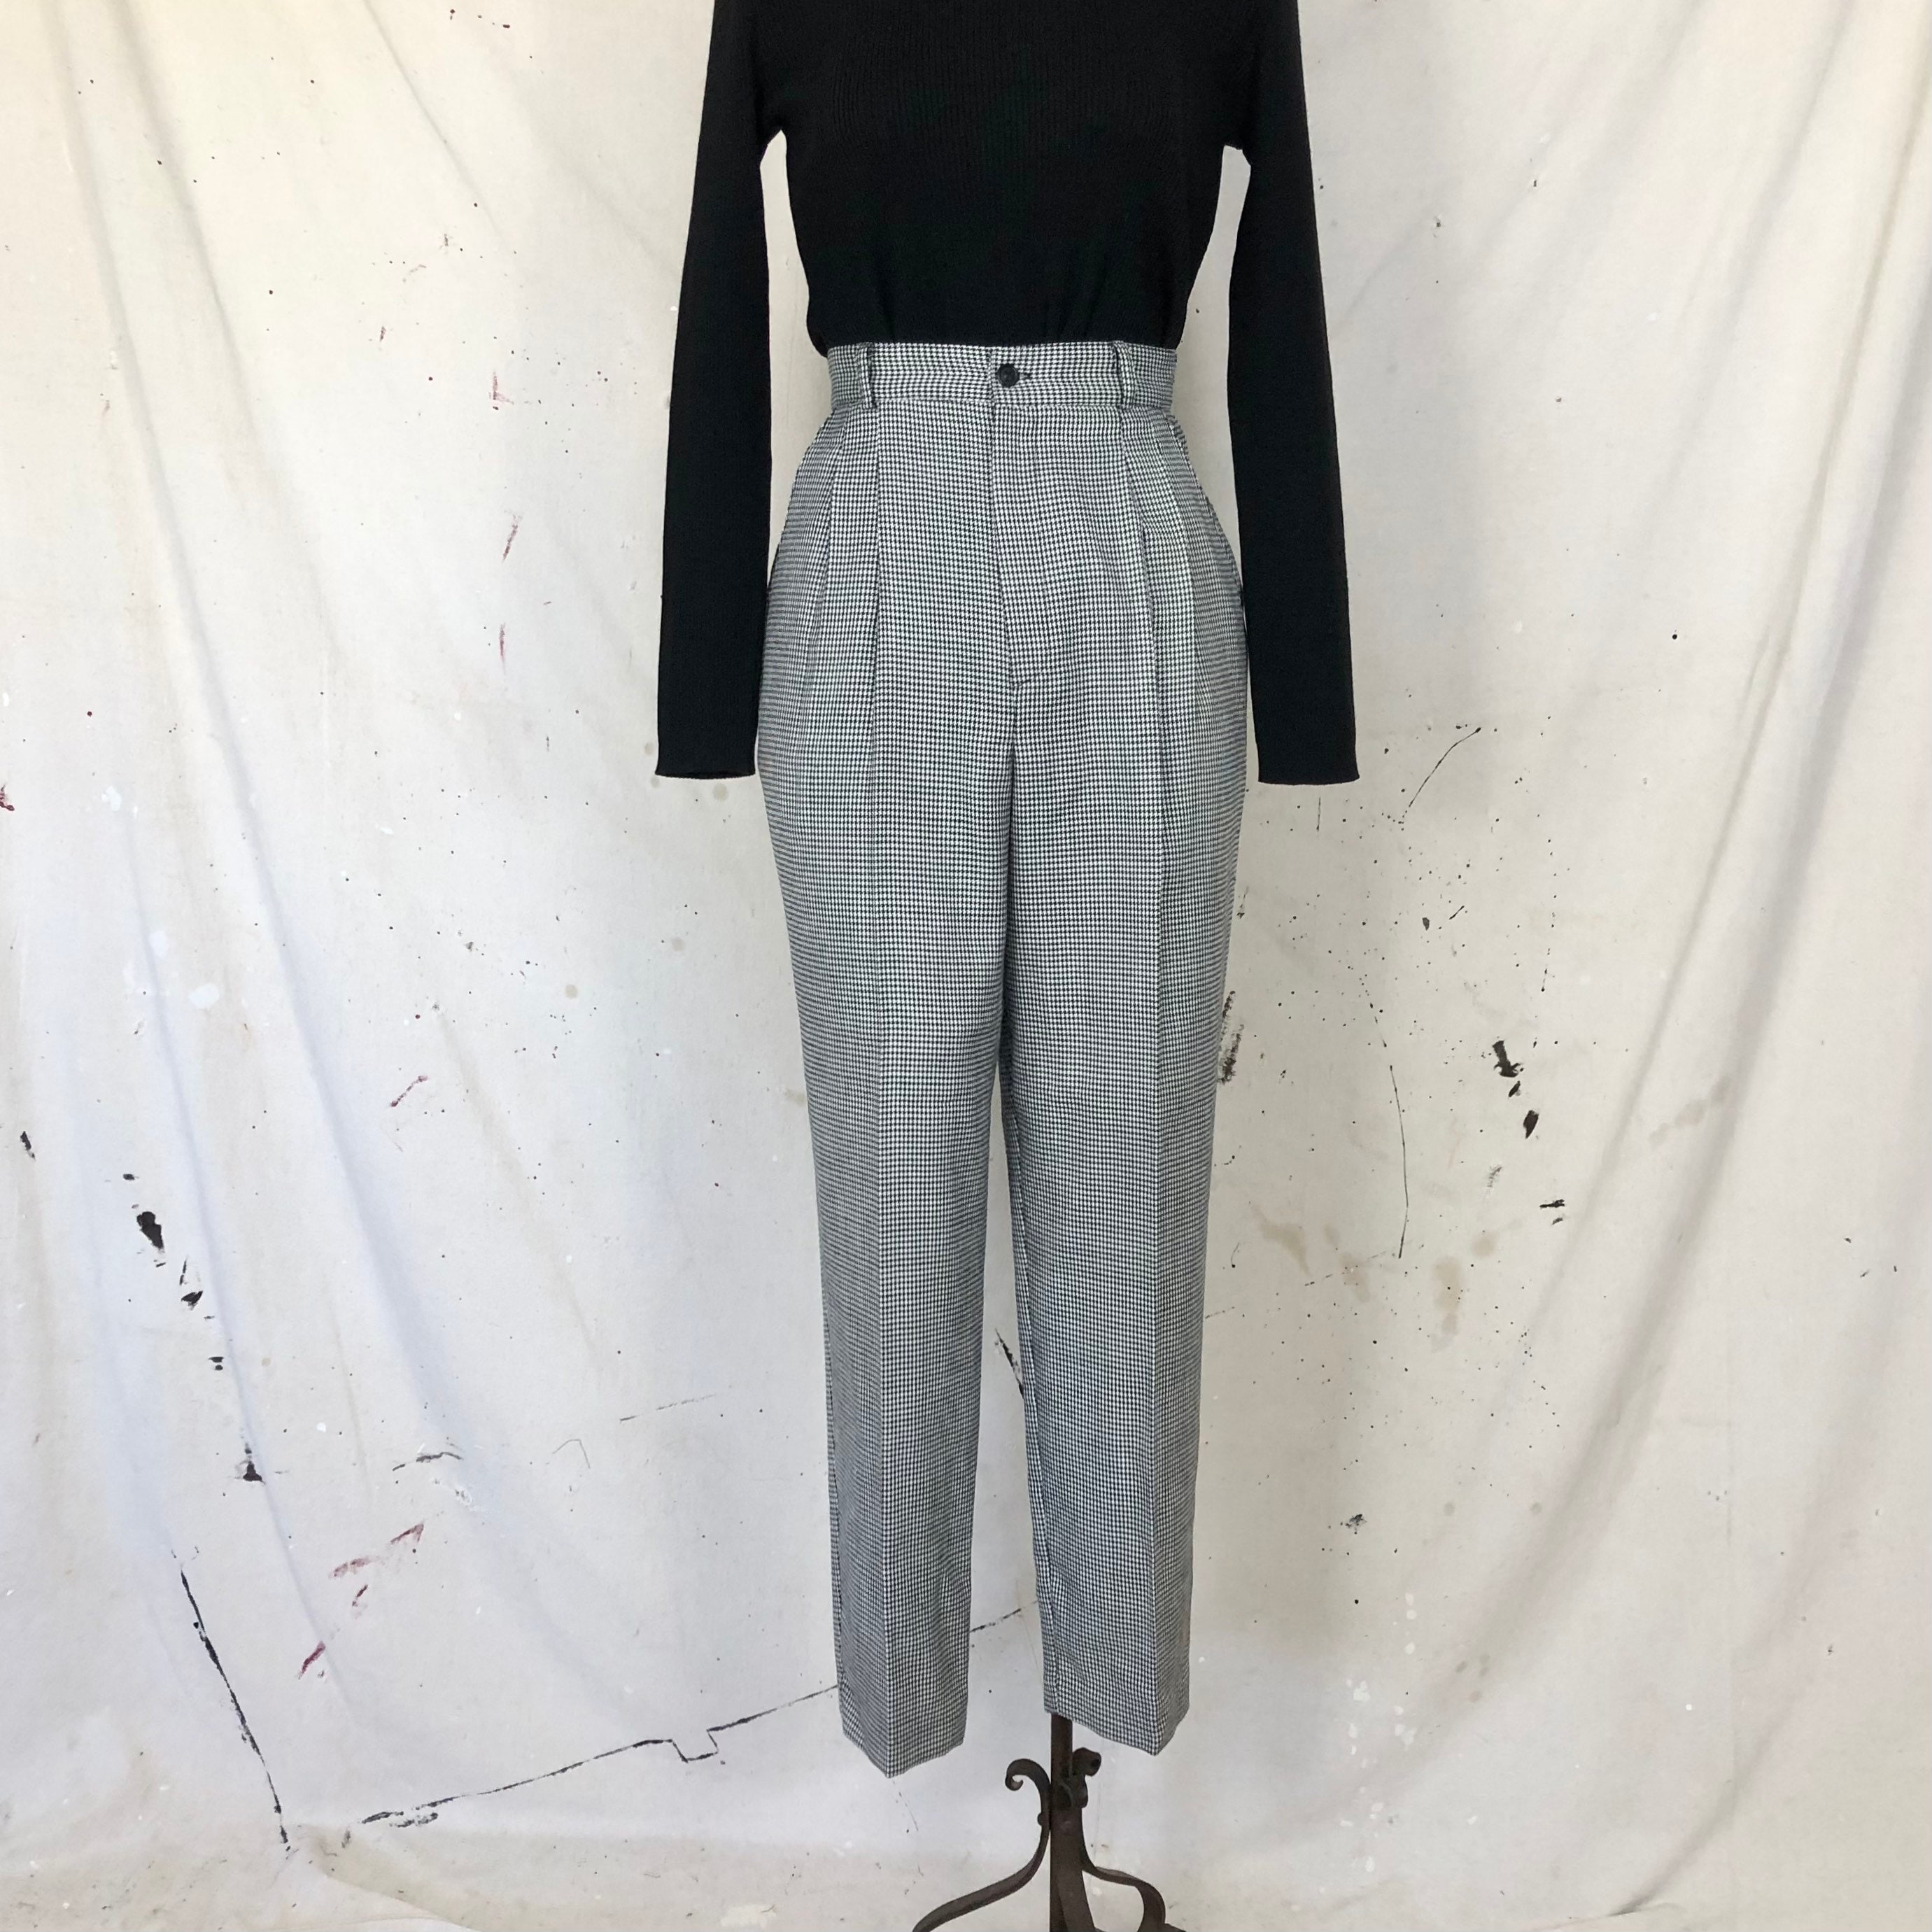 Vintage 90s Cream Tan Houndstooth Wool Trouser Dress Pants Size 10